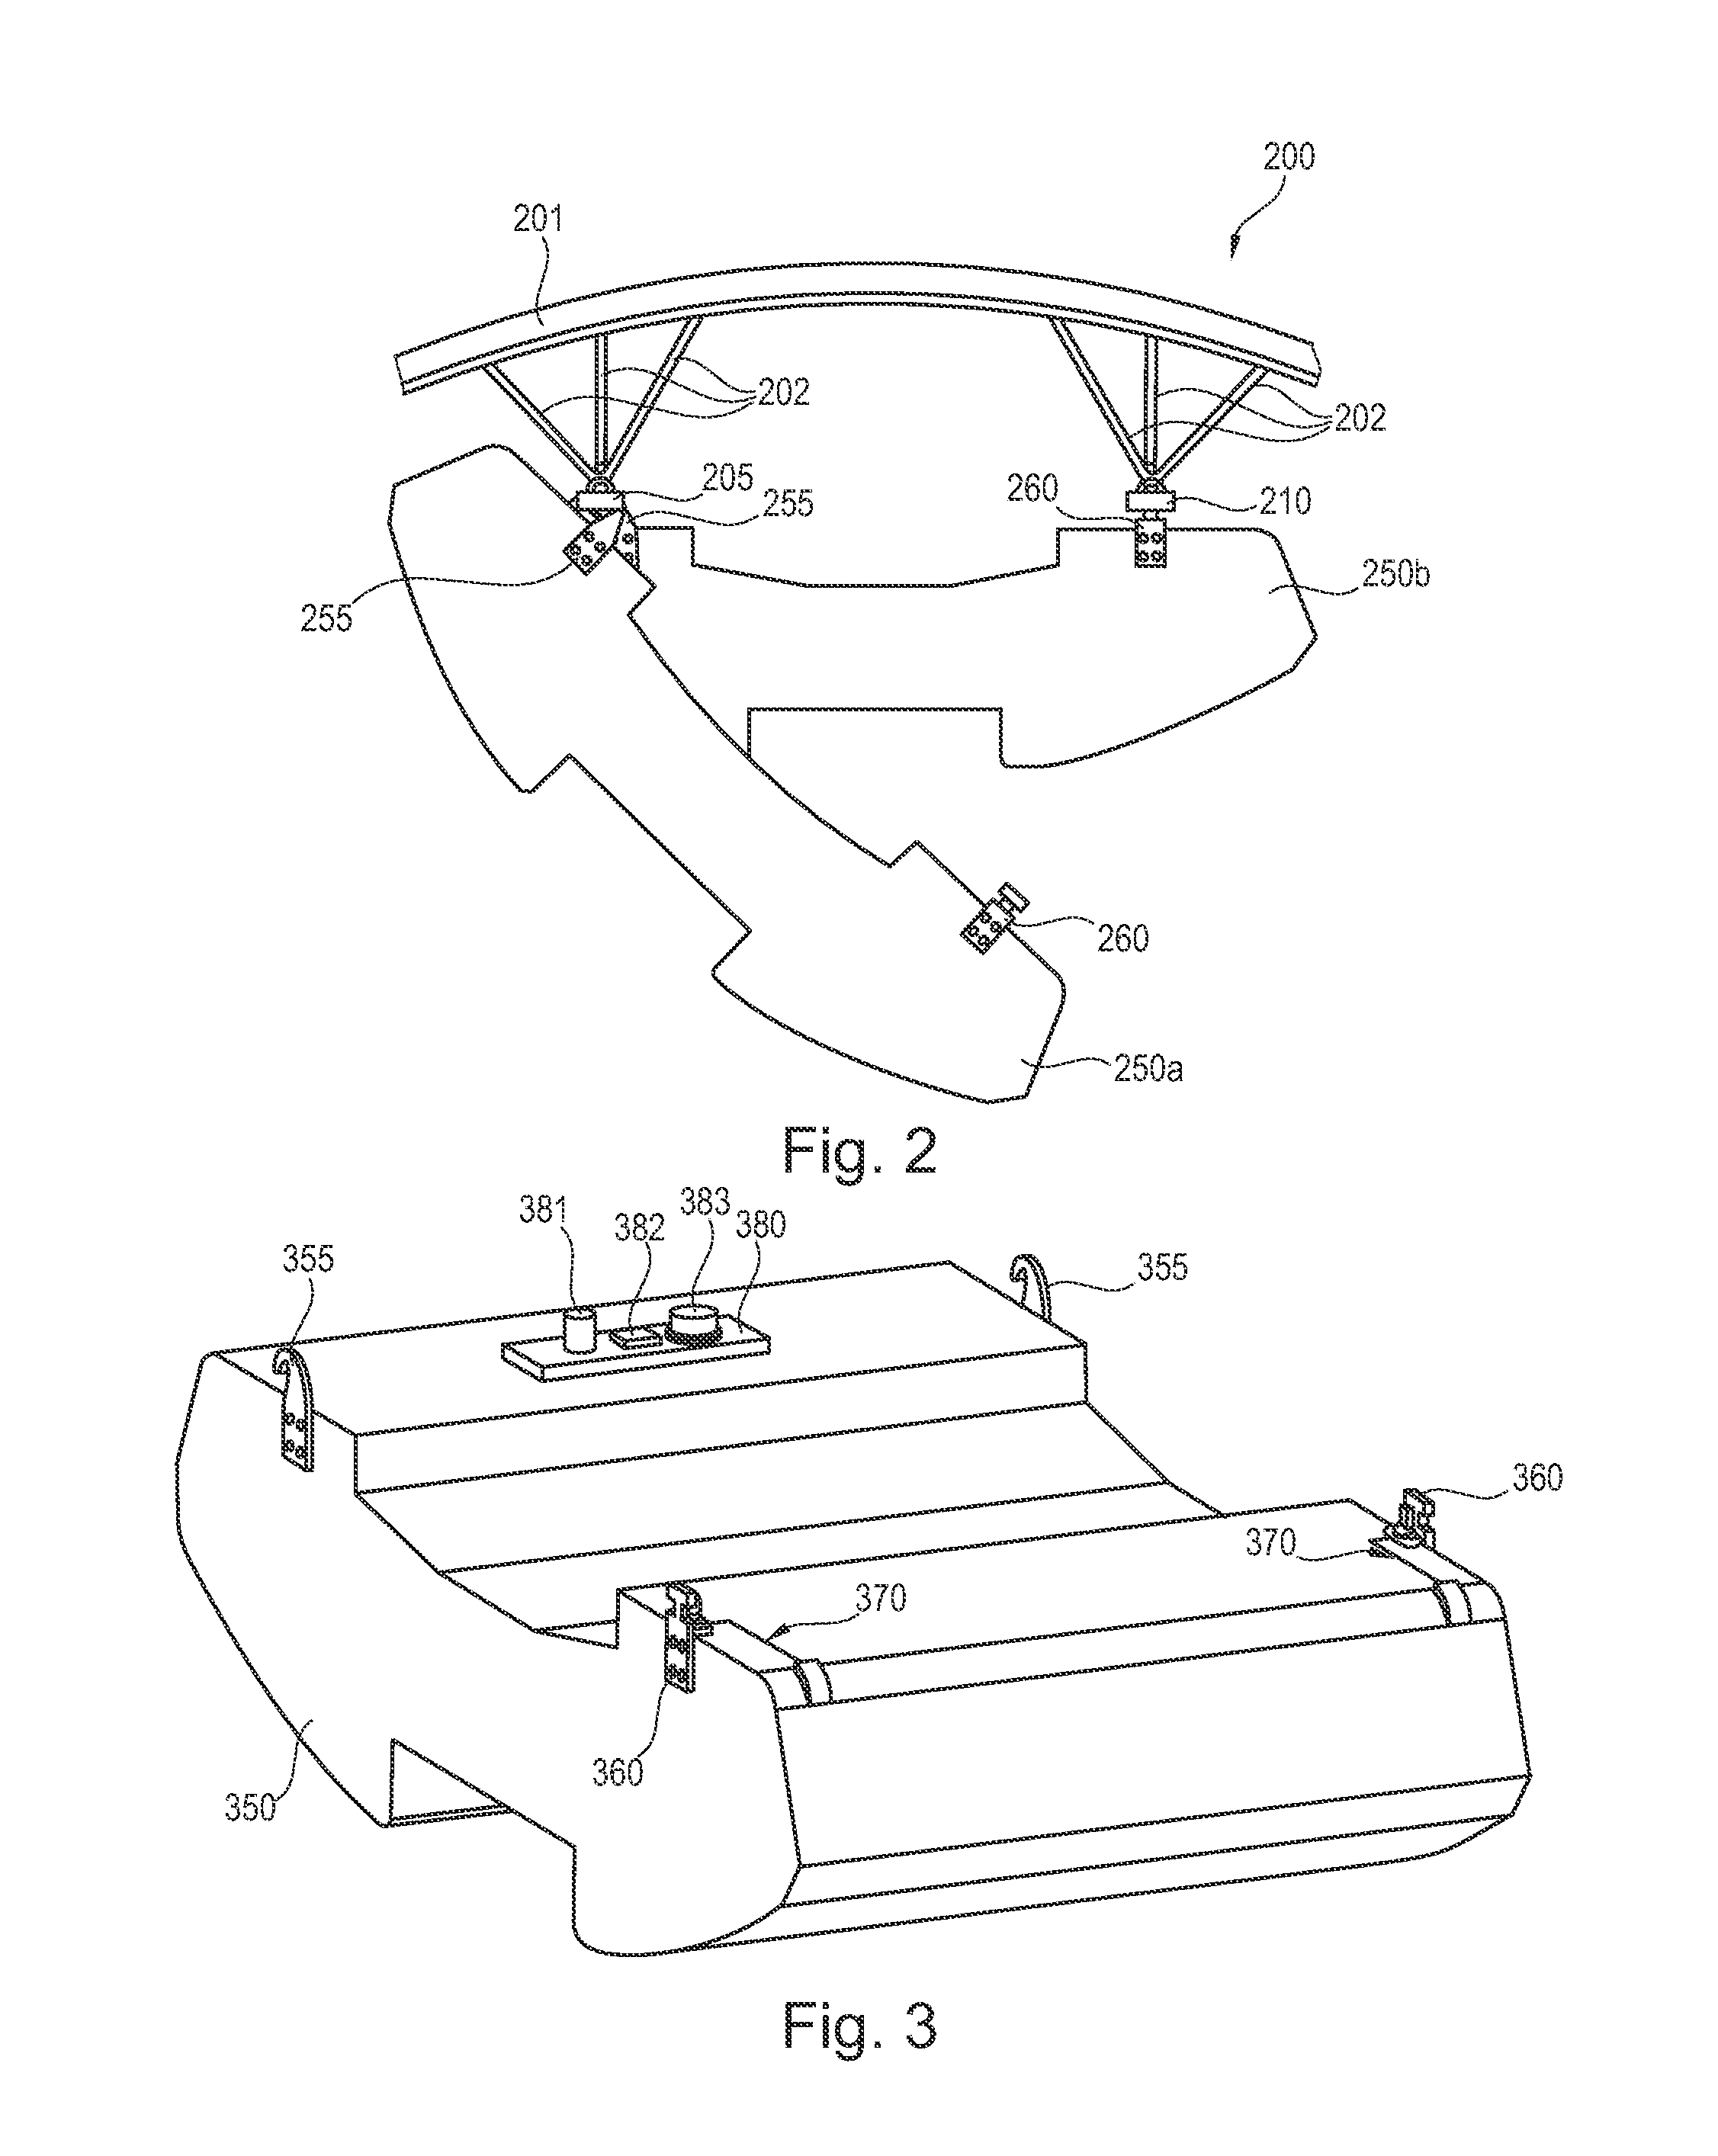 Quick-change fastening system for mounting an element to a fastening structure